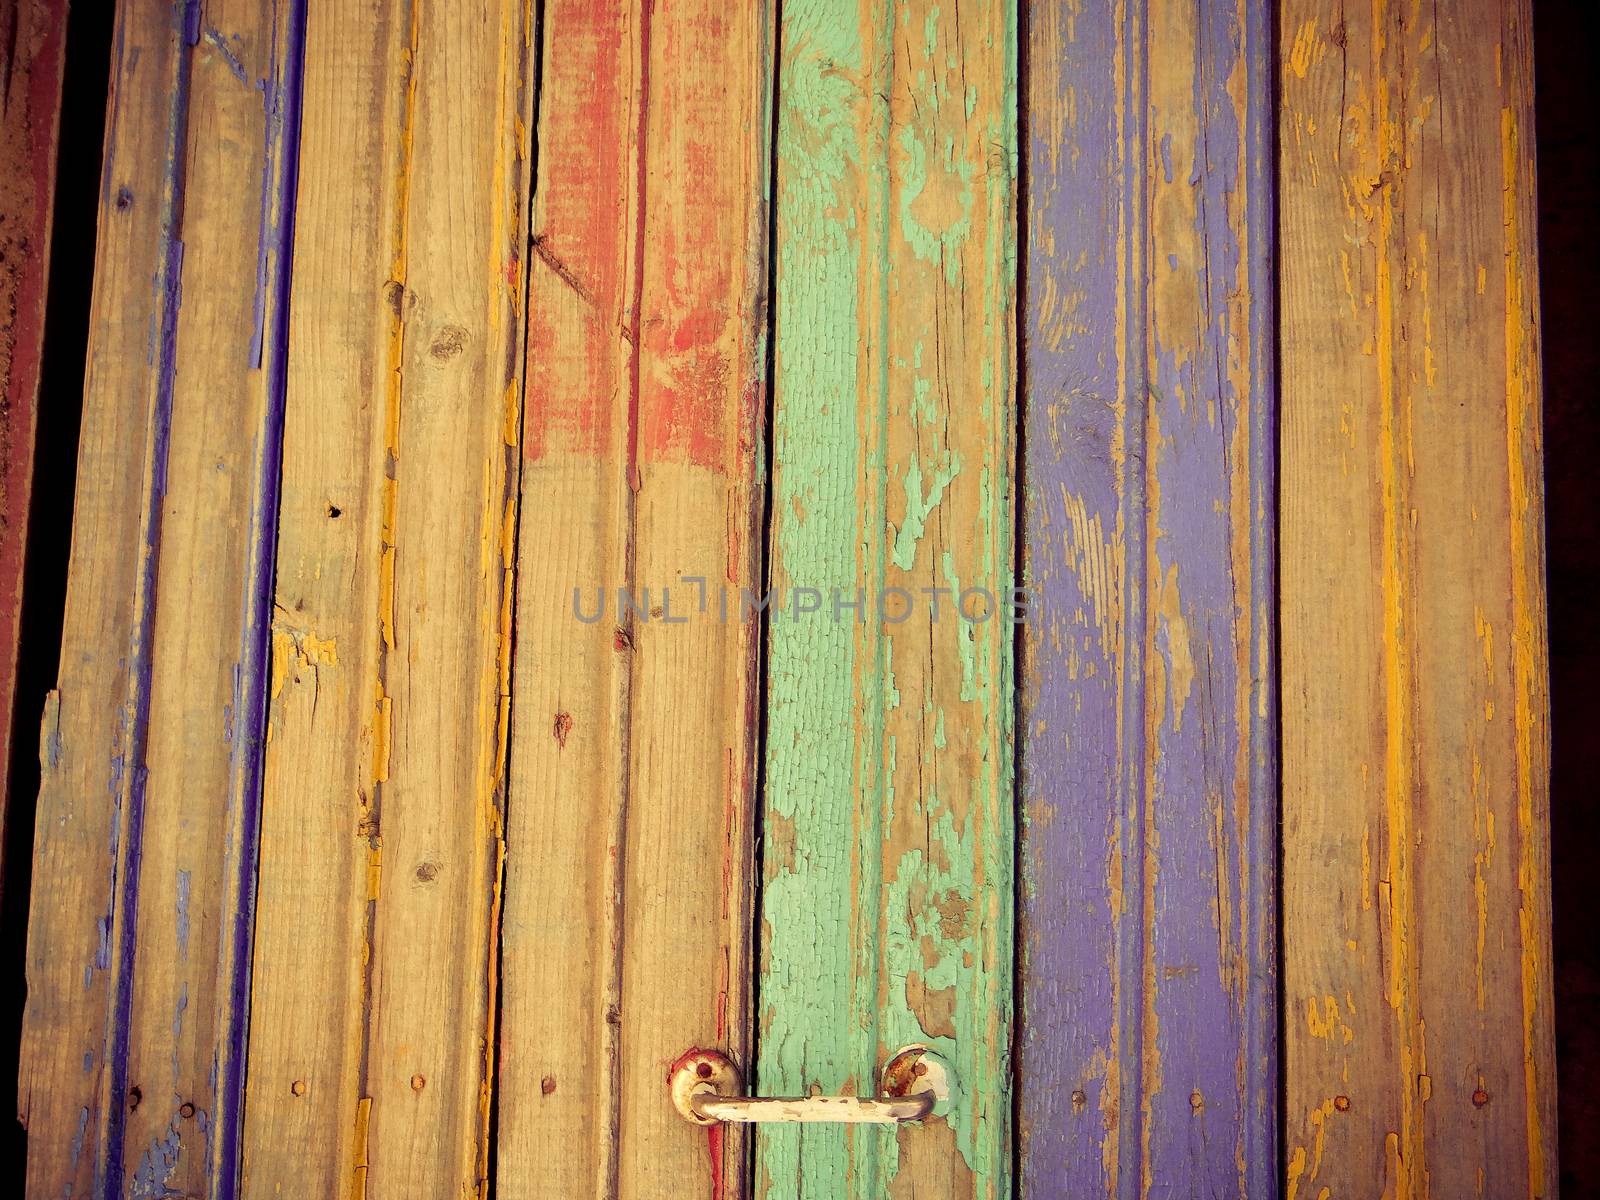 Painted wood texture by natali_brill